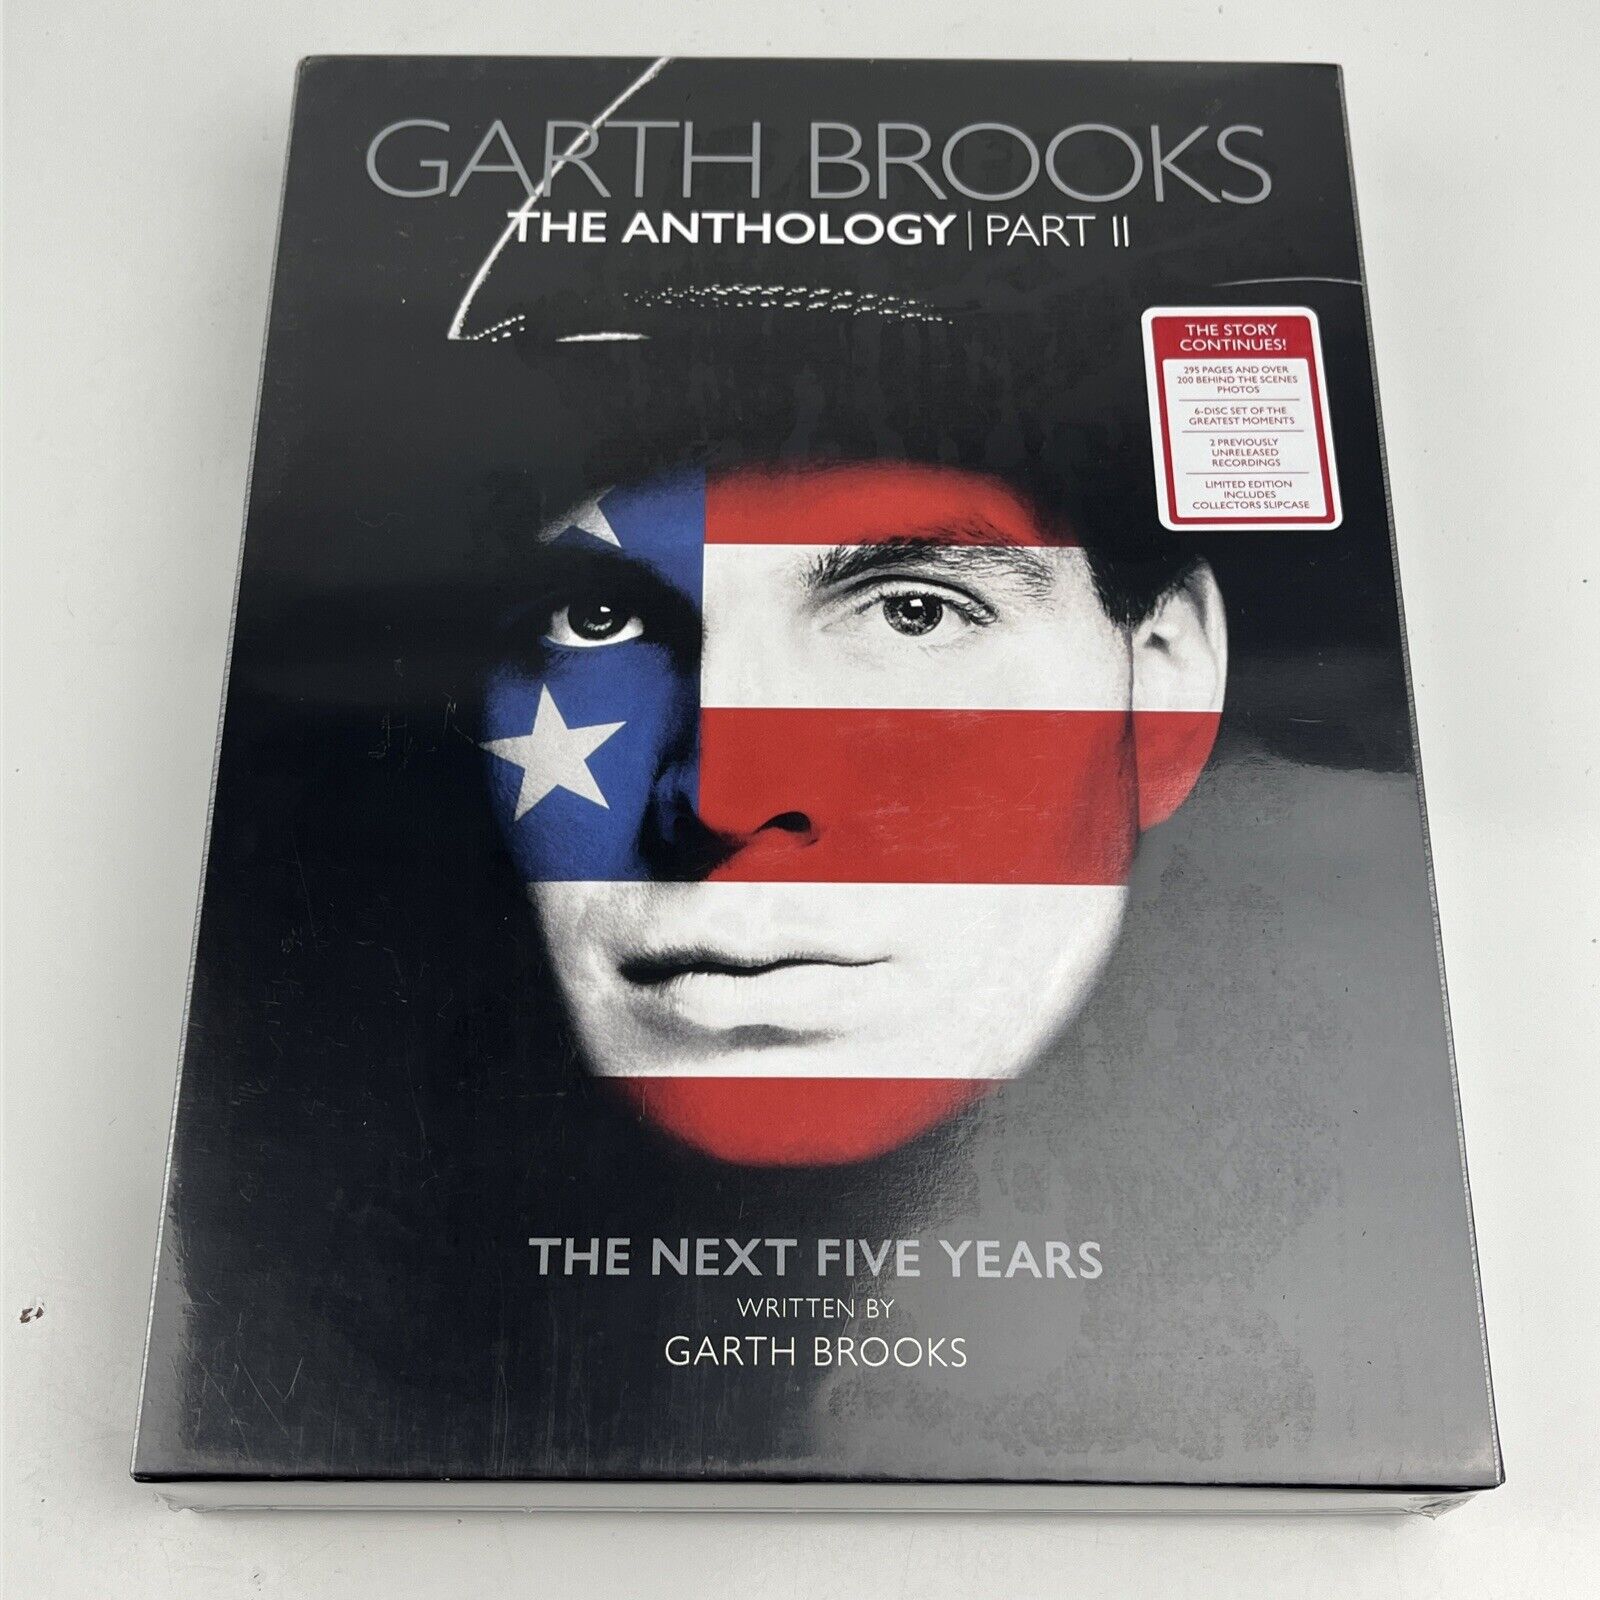 GARTH BROOKS ANTHOLOGY PART II (2) SPECIAL EDITION THE NEXT 5 YEARS- LAST ONE